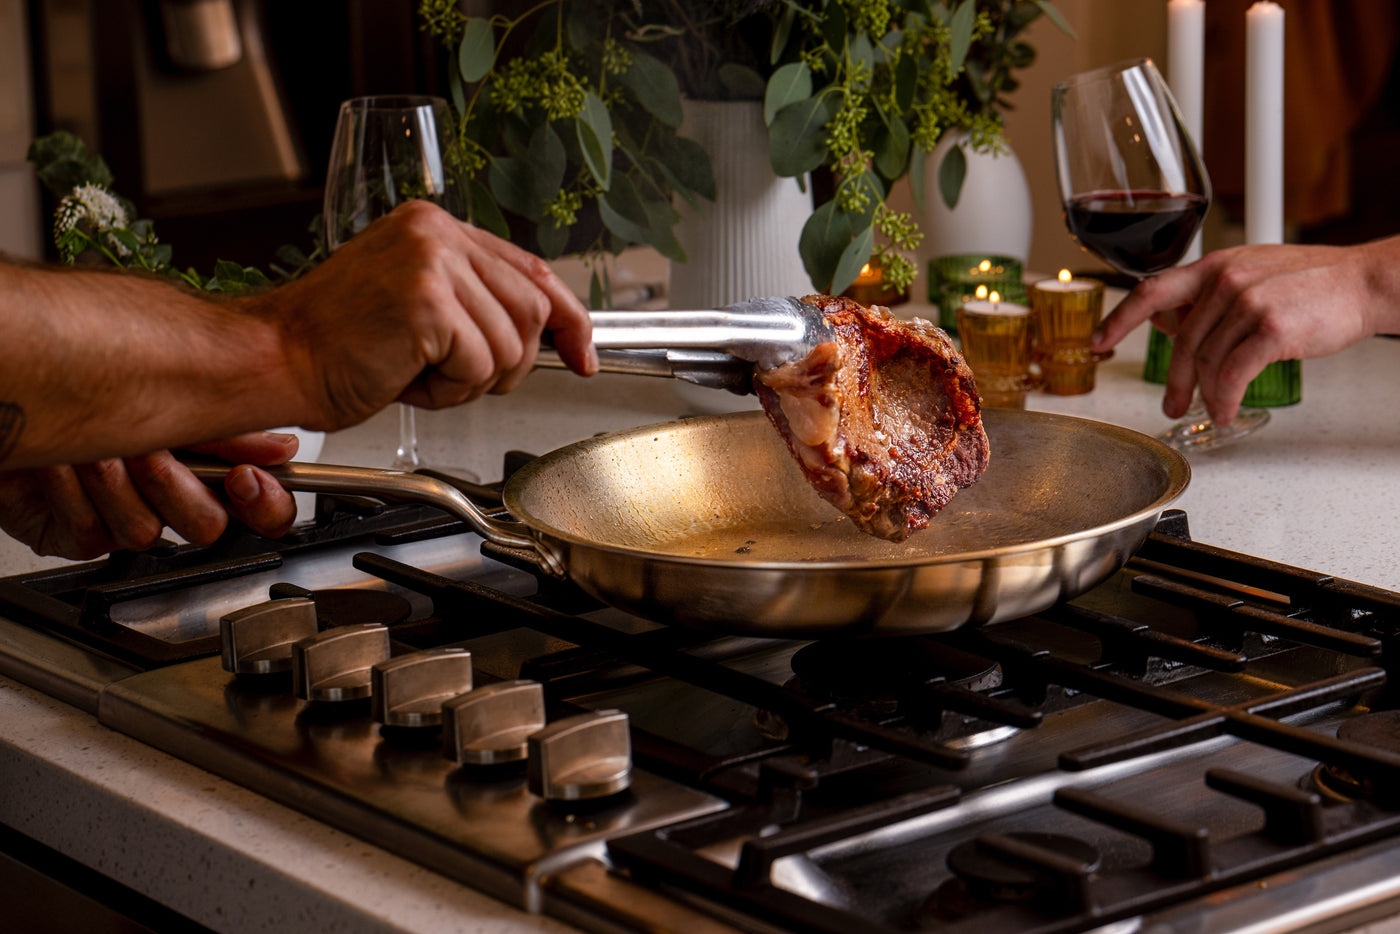 What Cookware Do Professional Chefs Use? - Only Cookware